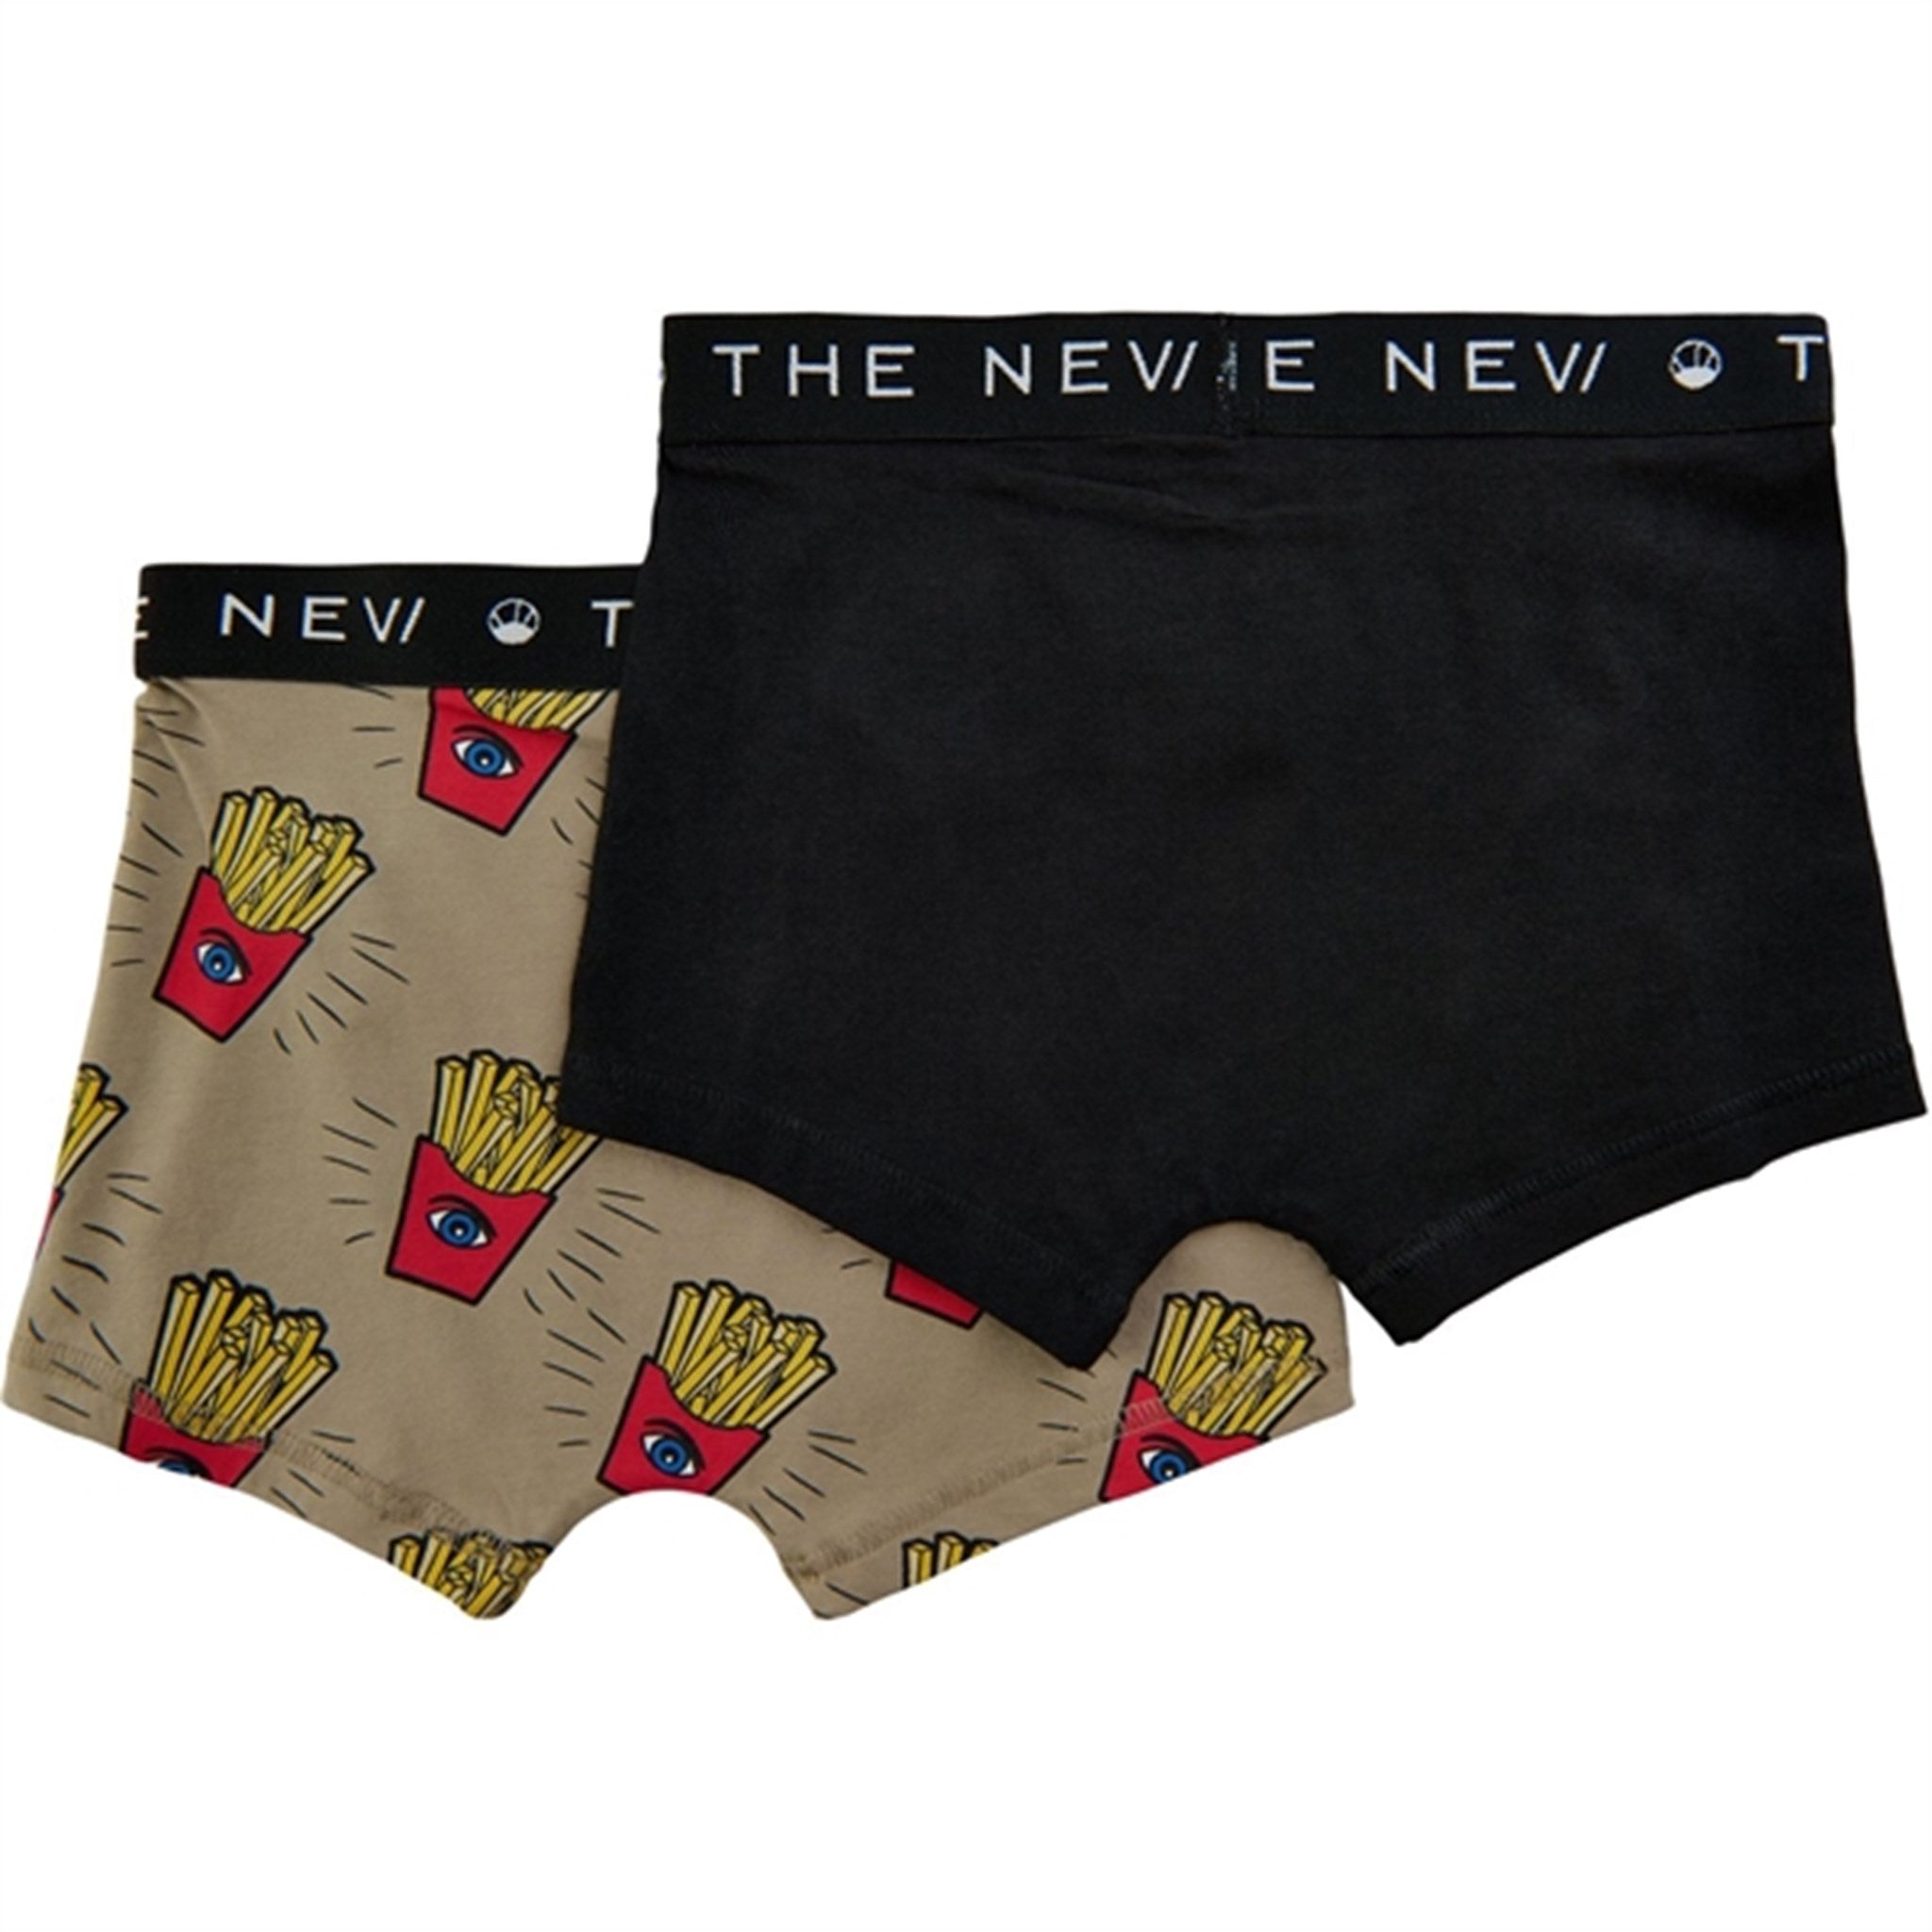 THE NEW Greige Boxers 2-pakke 2